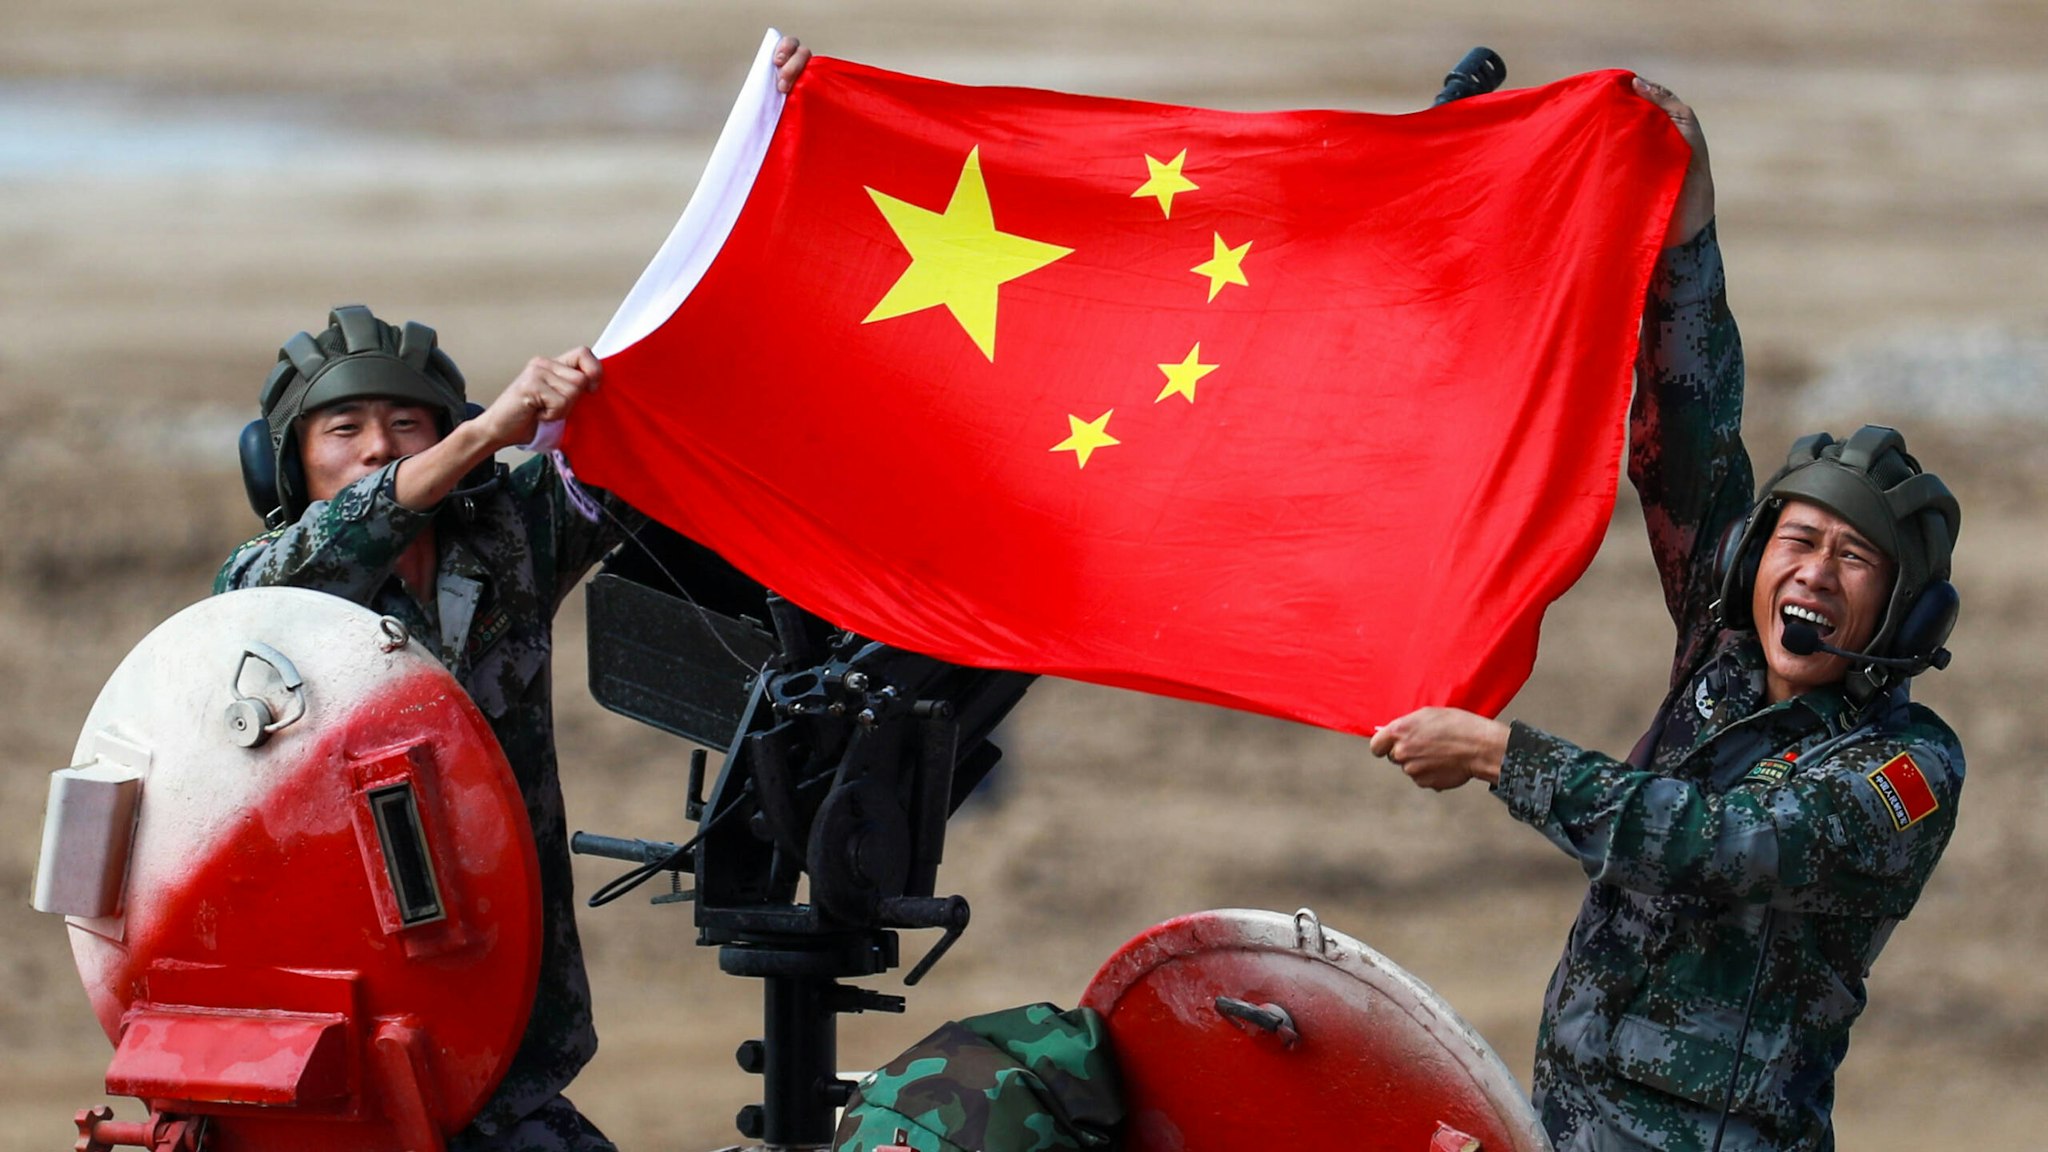 MOSCOW REGION, RUSSIA - AUGUST 28, 2021: People's Liberation Army (PLA) soldiers pose with a Chinese flag on a TYPE 96B tank during the Tank Biathlon Contest at the 2021 International Army Games at a military training ground in Alabino, Moscow Region. This year, 19 teams which are divided into two divisions, are competing in the contest.